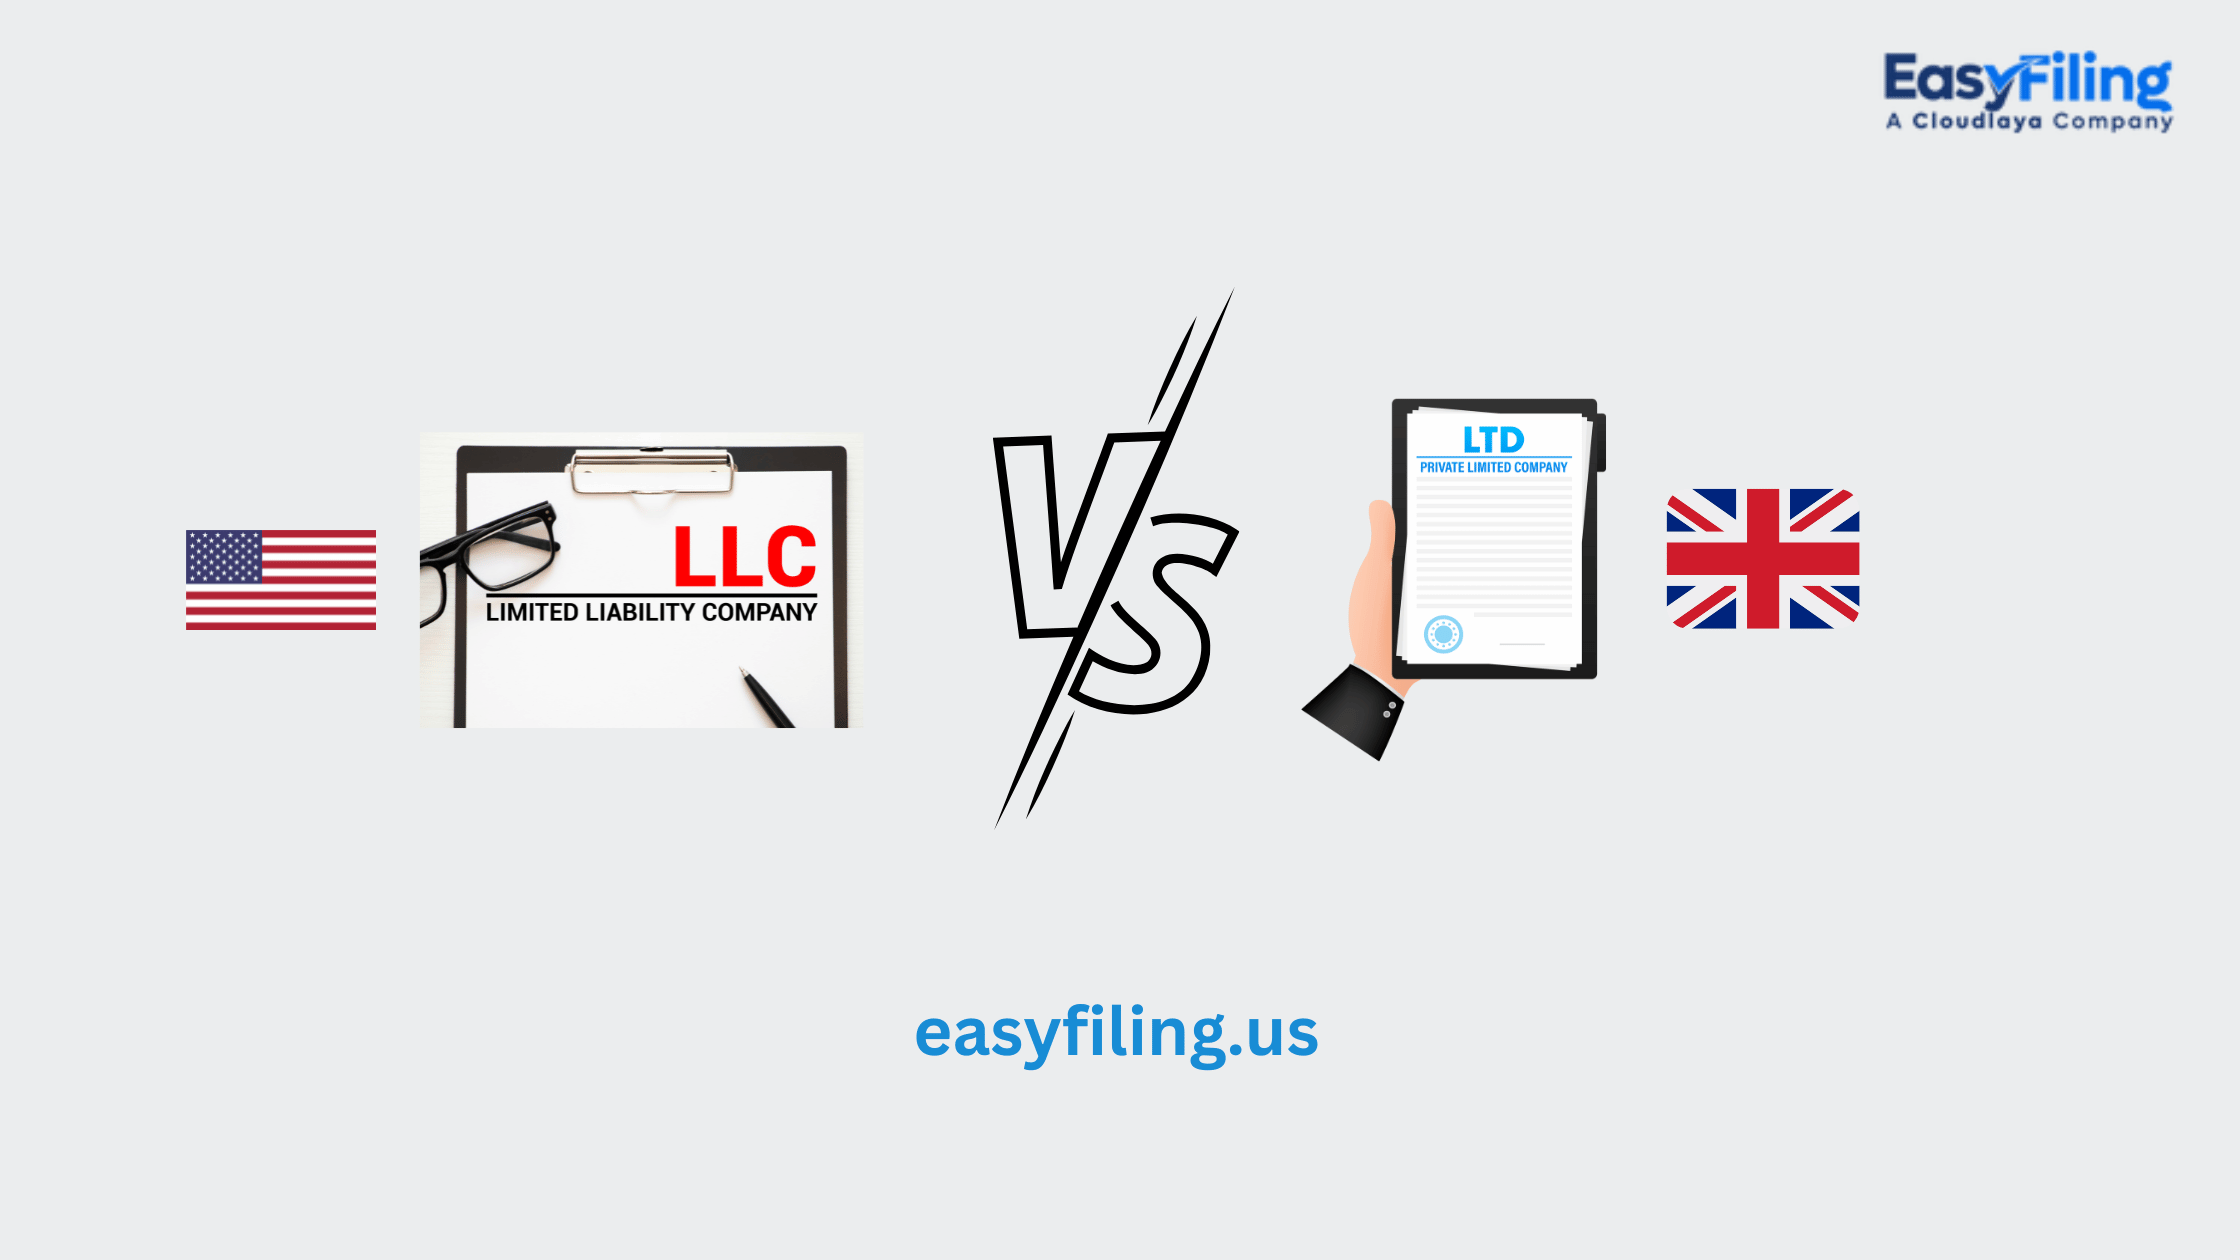 LLC in the US vs Ltd in the UK: Which is Better for Your